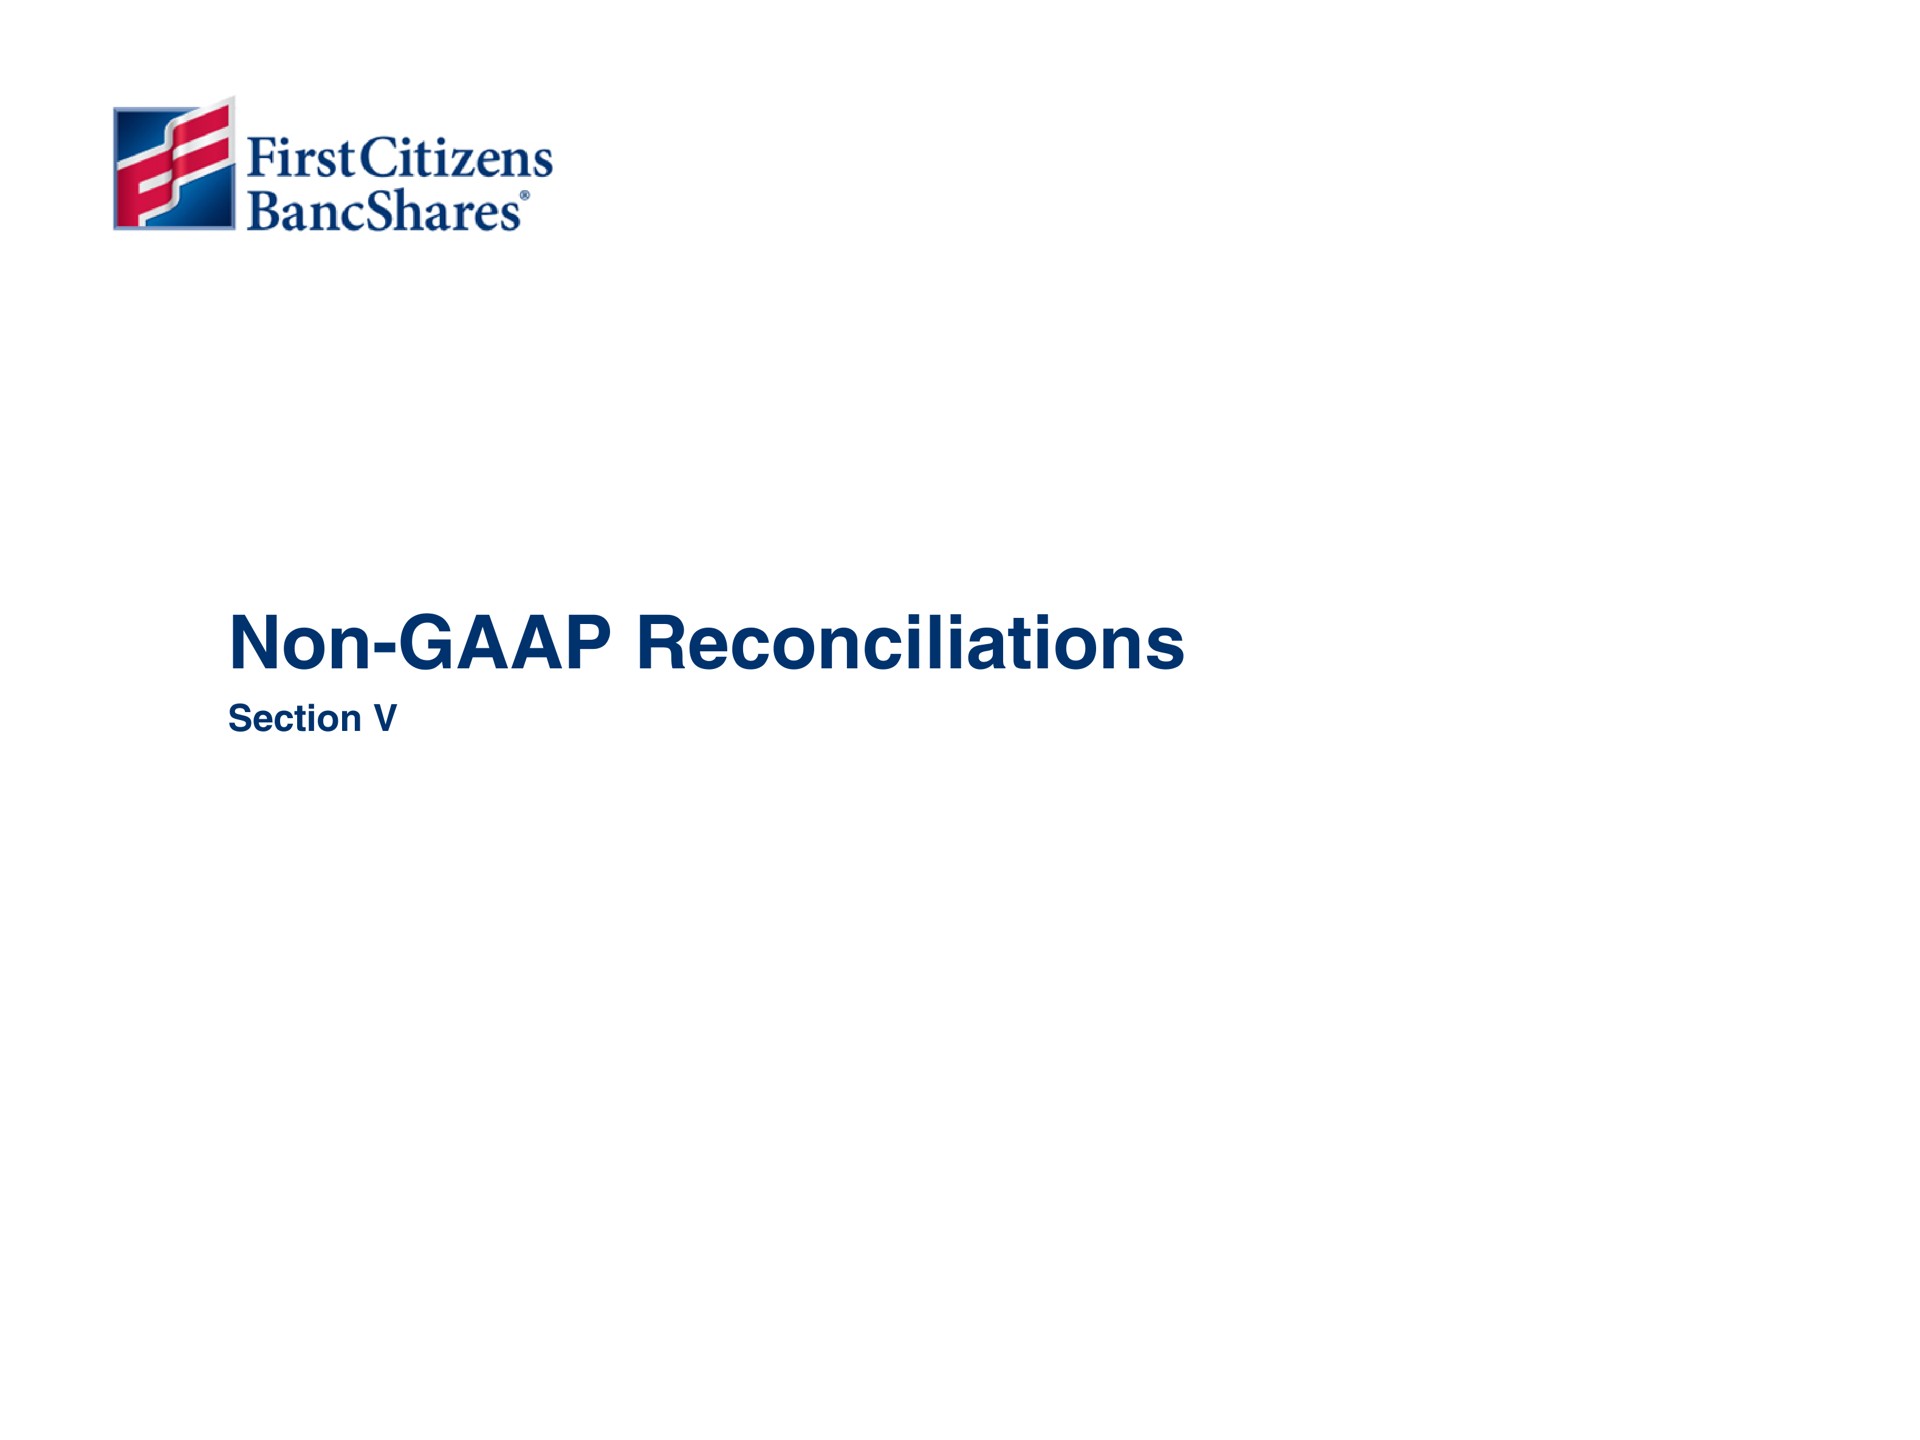 non reconciliations first citizens | First Citizens BancShares